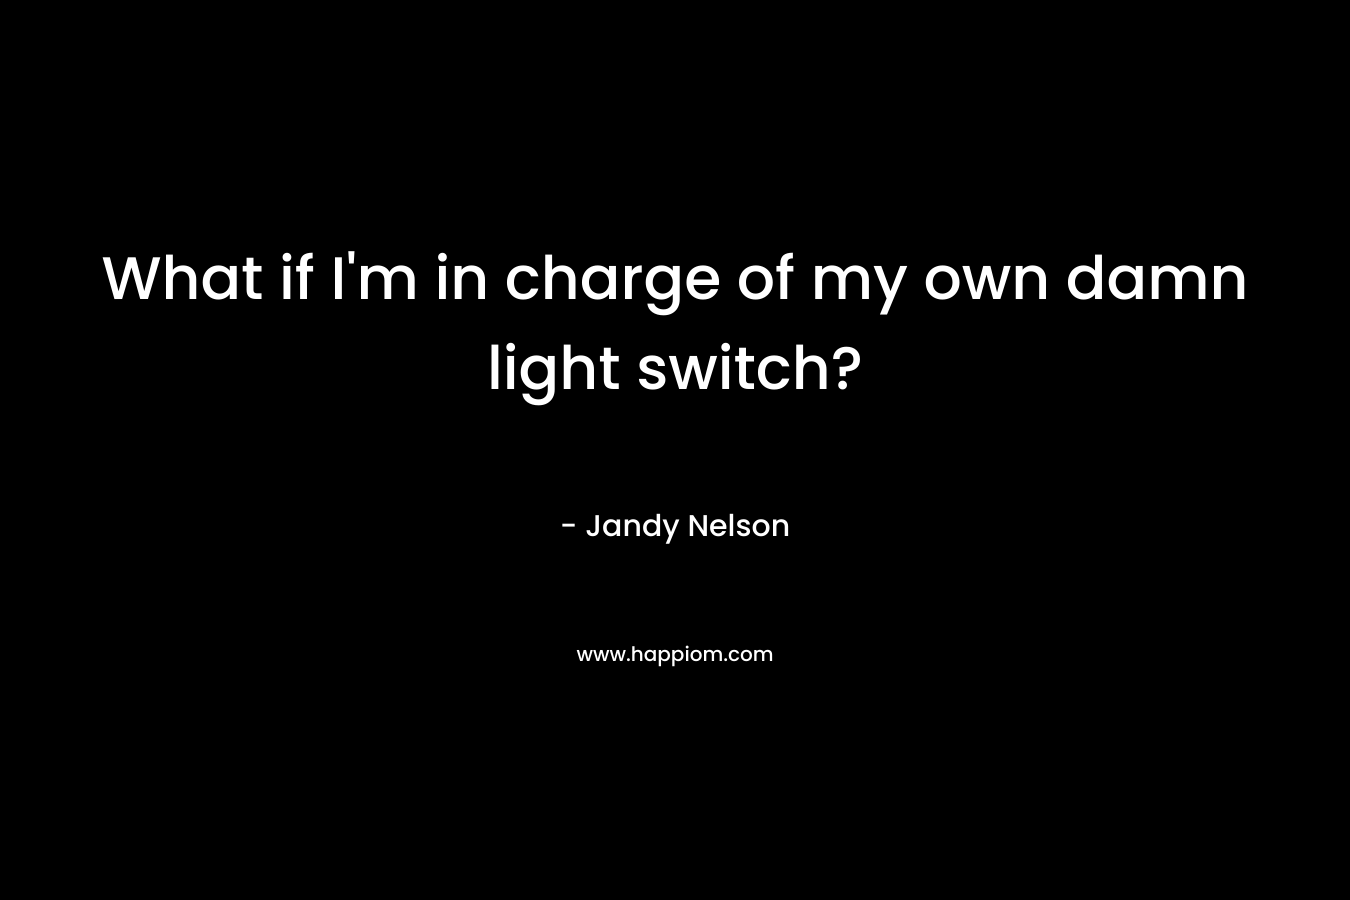 What if I'm in charge of my own damn light switch?